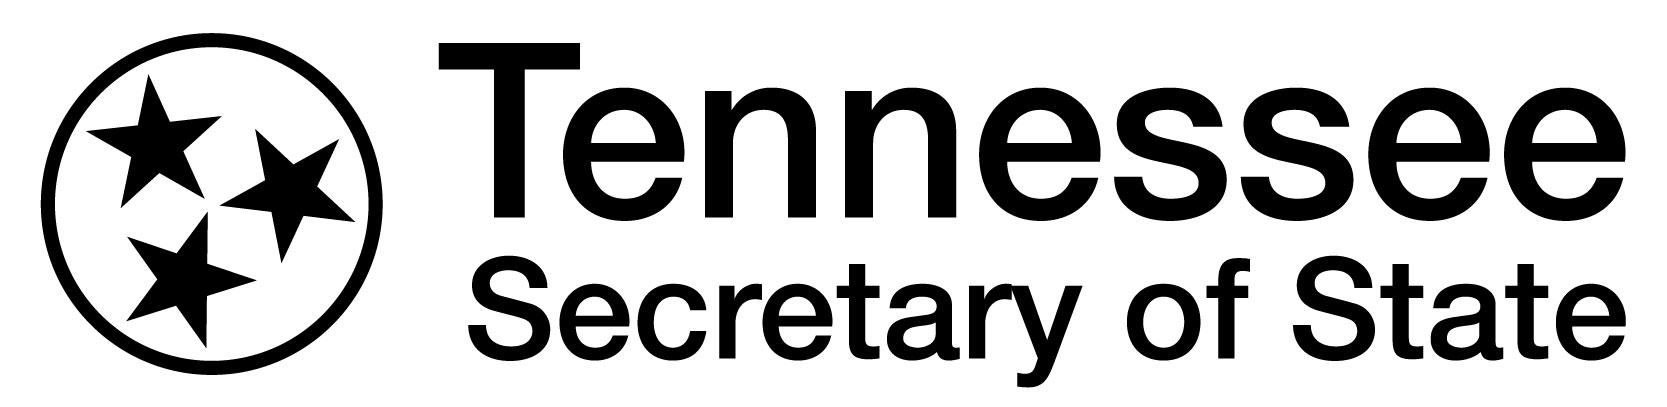 Office of the Tennessee Secretary of State logo